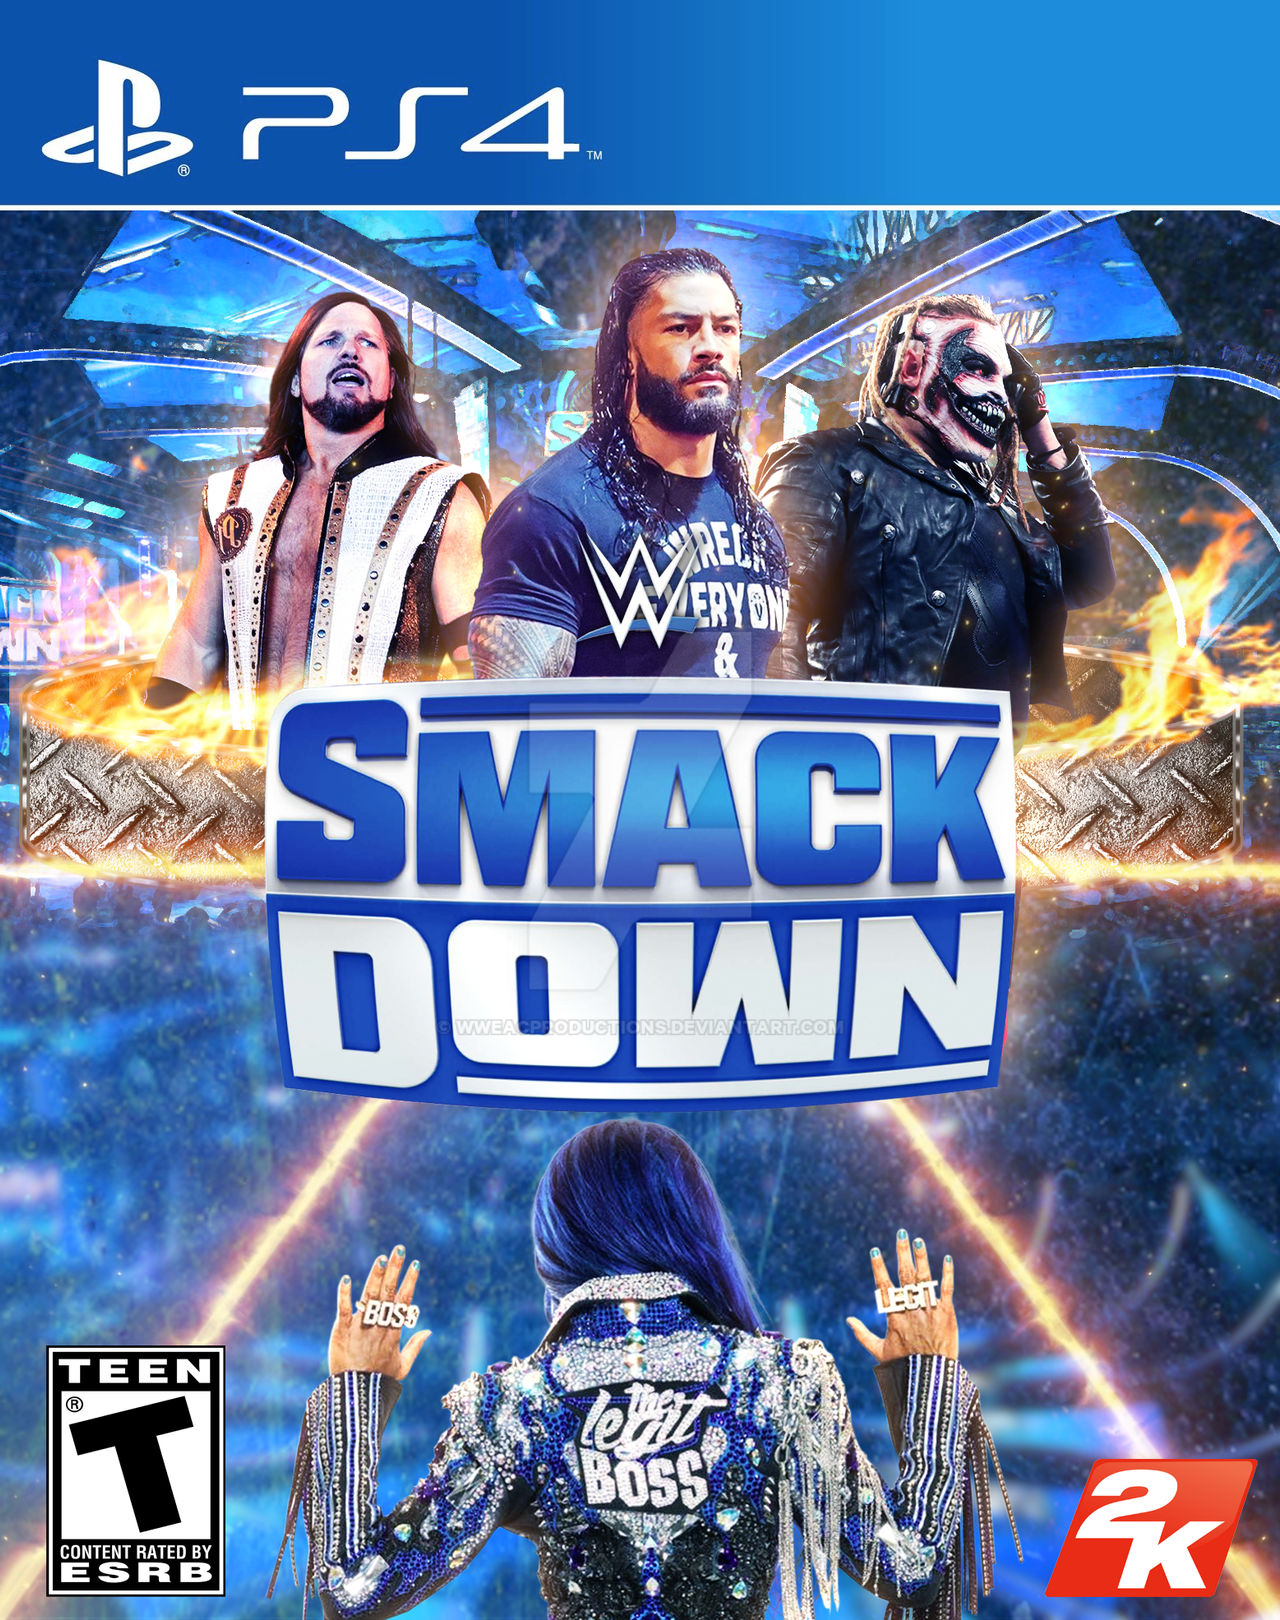 2K: SMACKDOWN (CUSTOM GAME COVER) 2020 {HD} by WWEACProductions on  DeviantArt